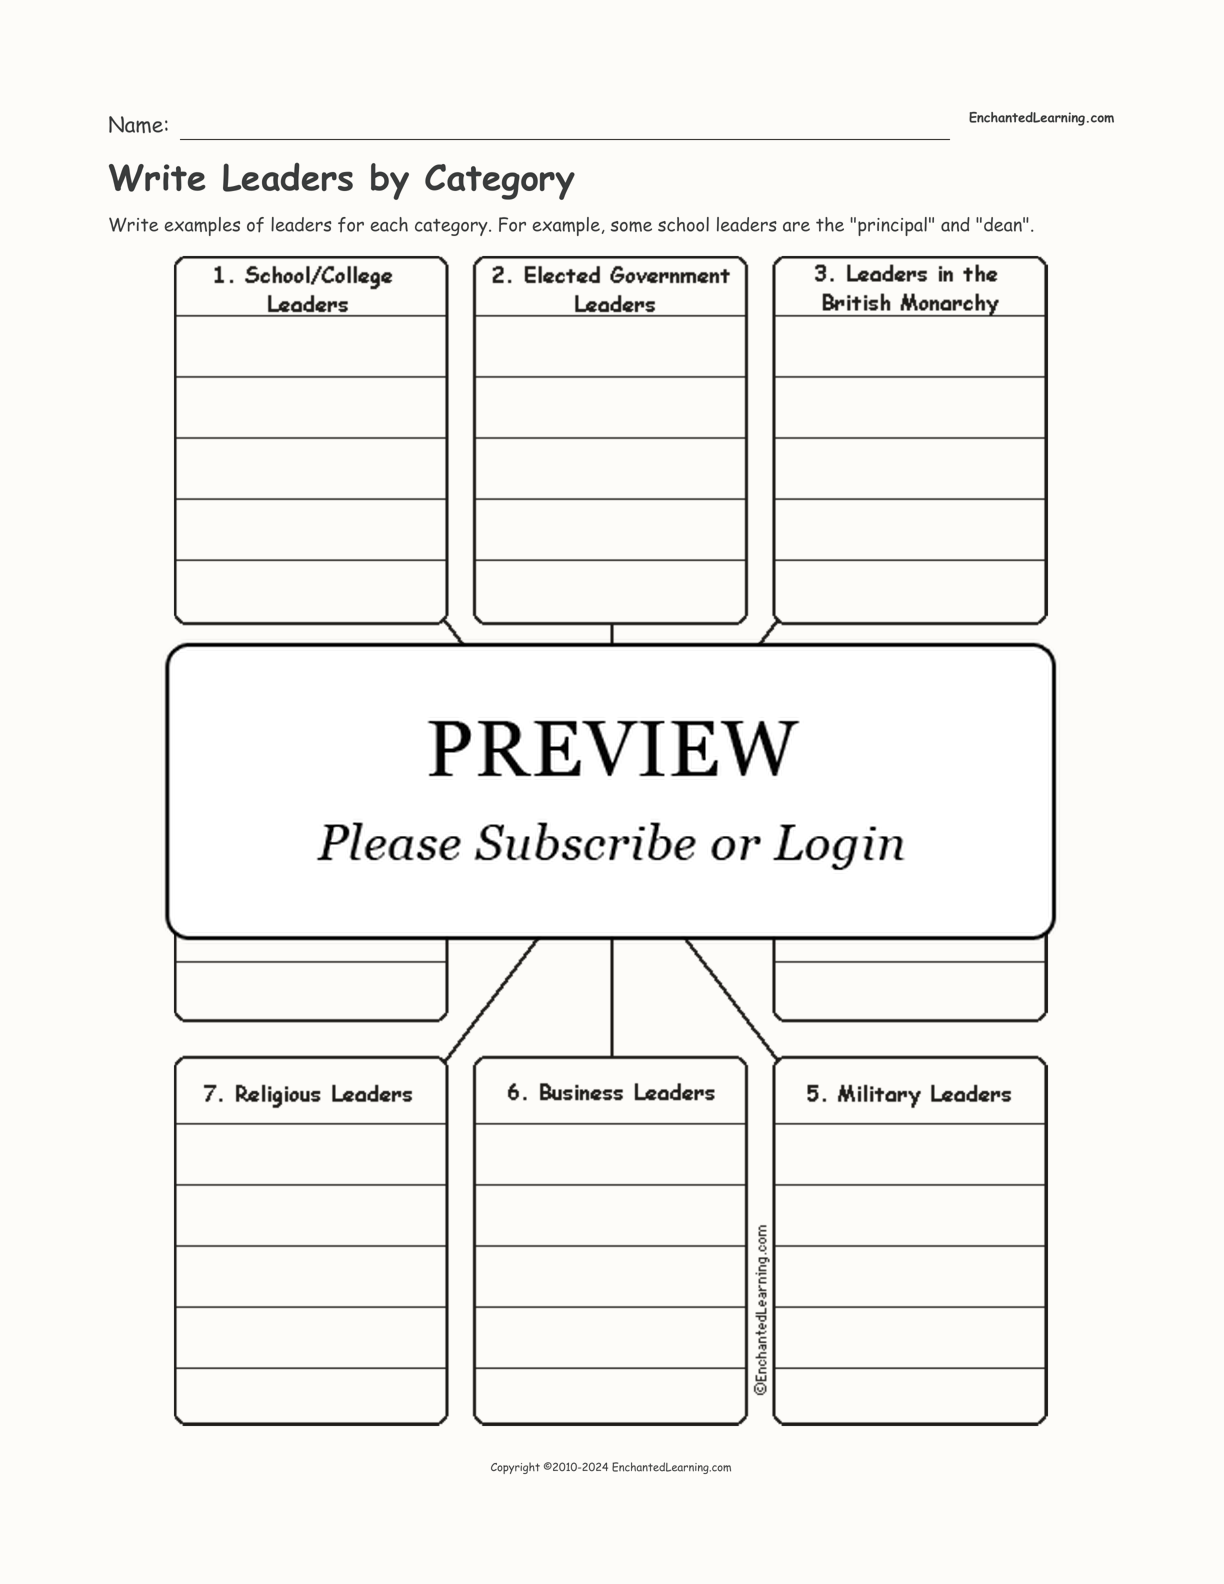 Write Leaders by Category interactive worksheet page 1